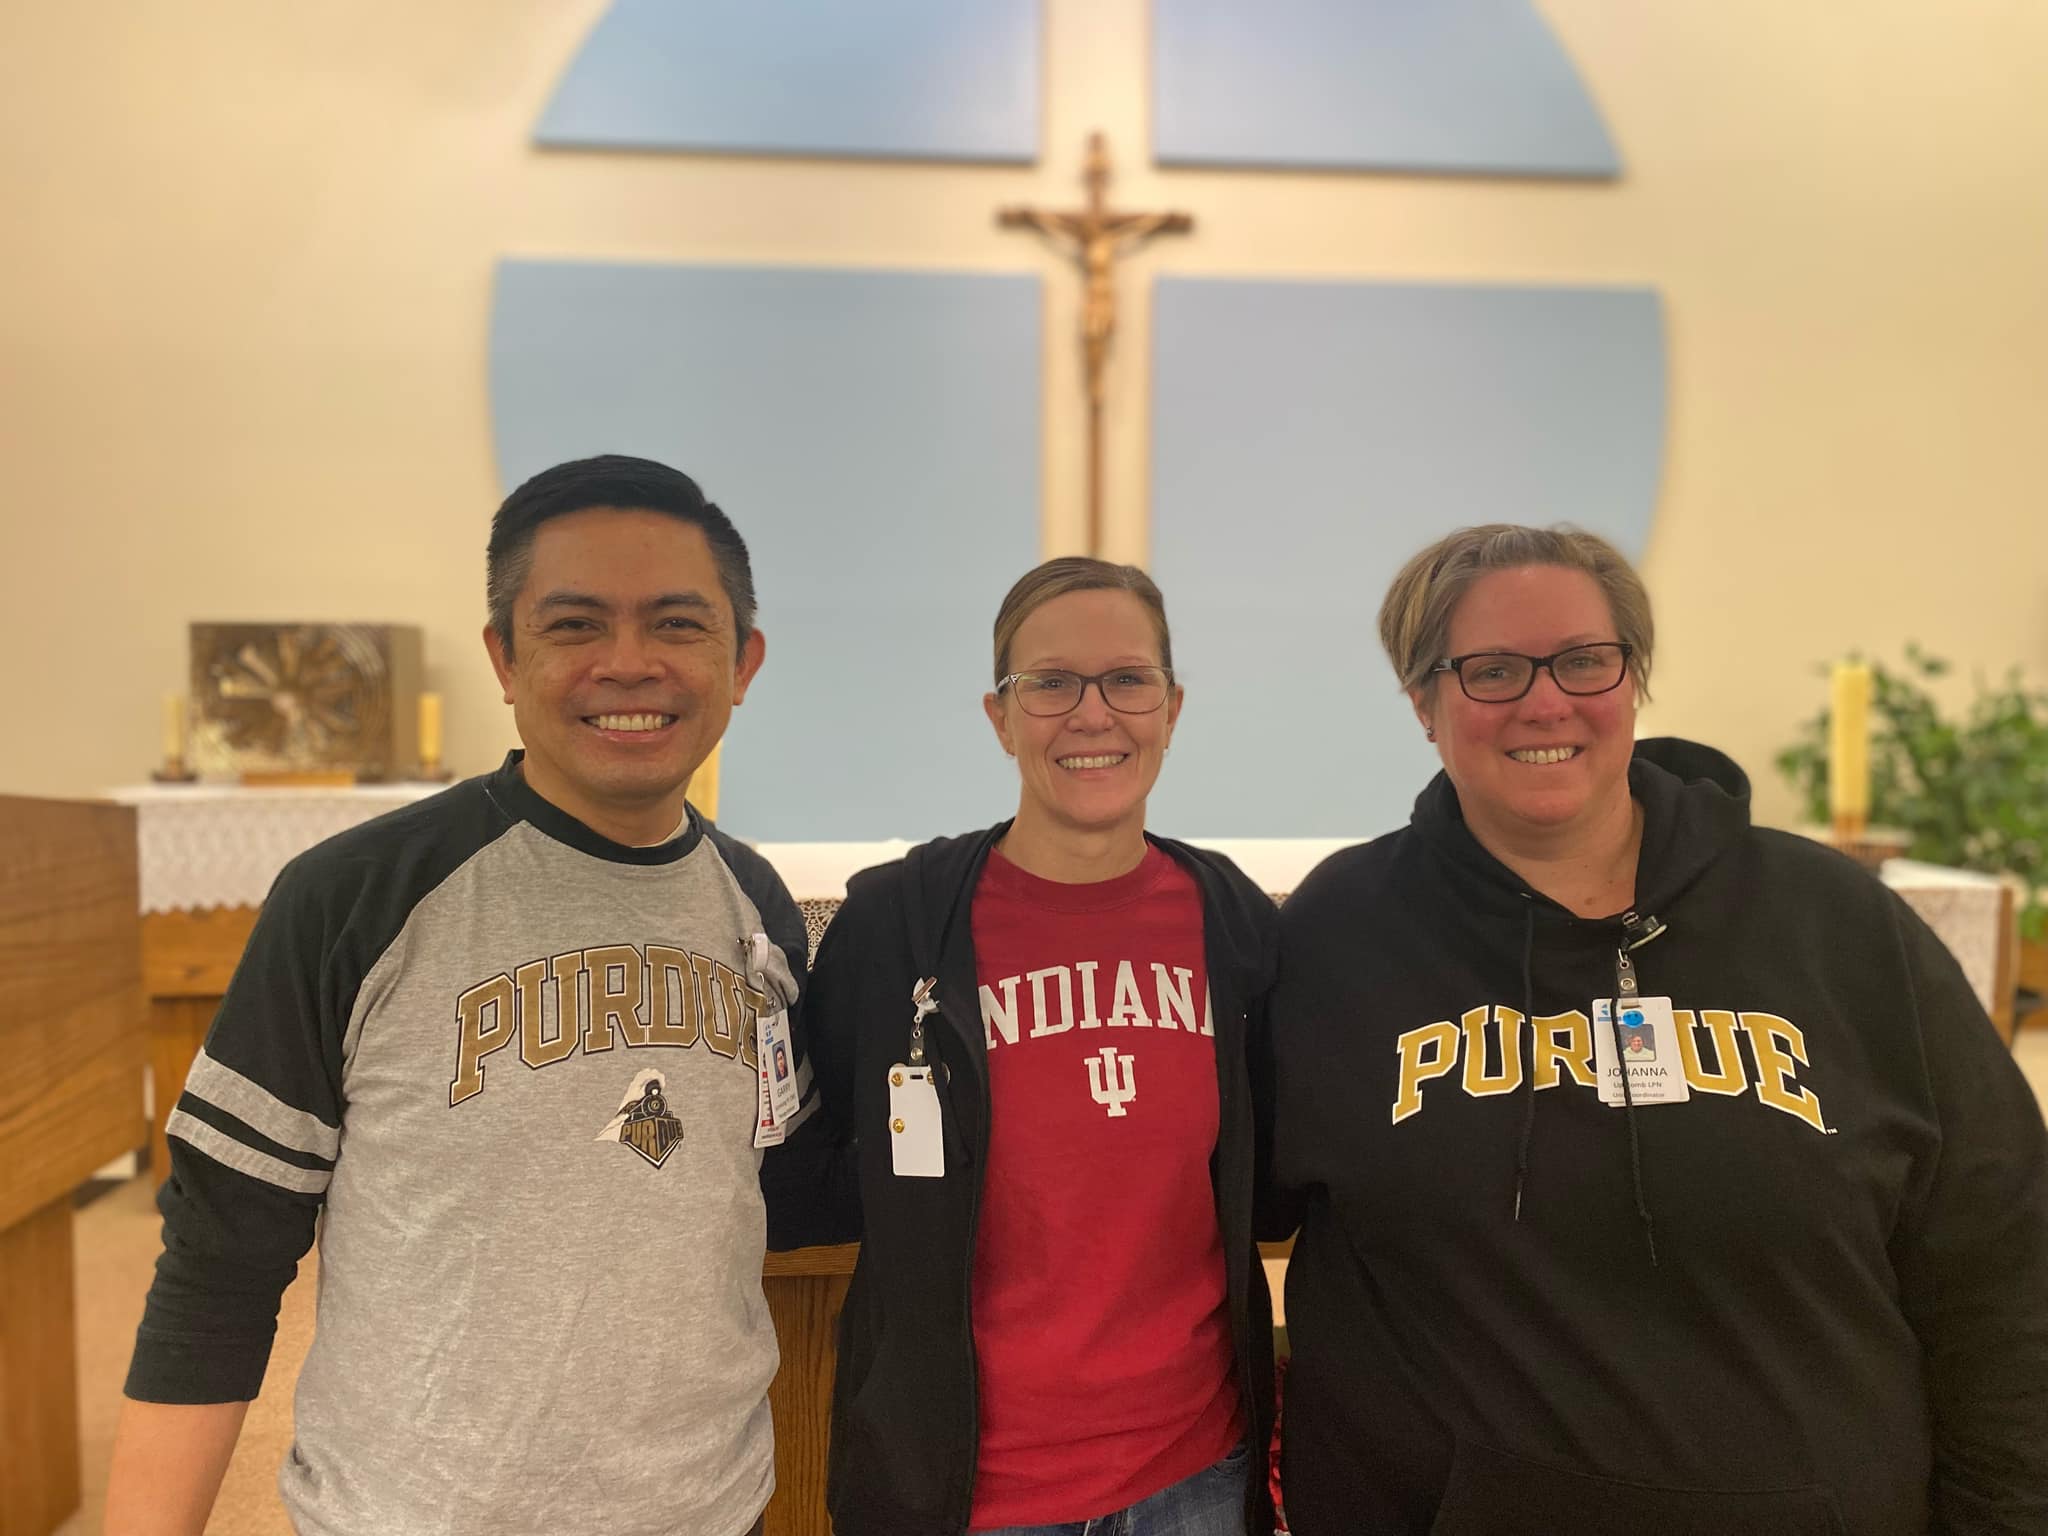 All of us here at Saint Anthony live in the “Hoosier State” BUT… it looks like the Boilers are putting a squeeze on IU.  Go Boilers!!  Go IU!  Go gold & black!! Go big red!!